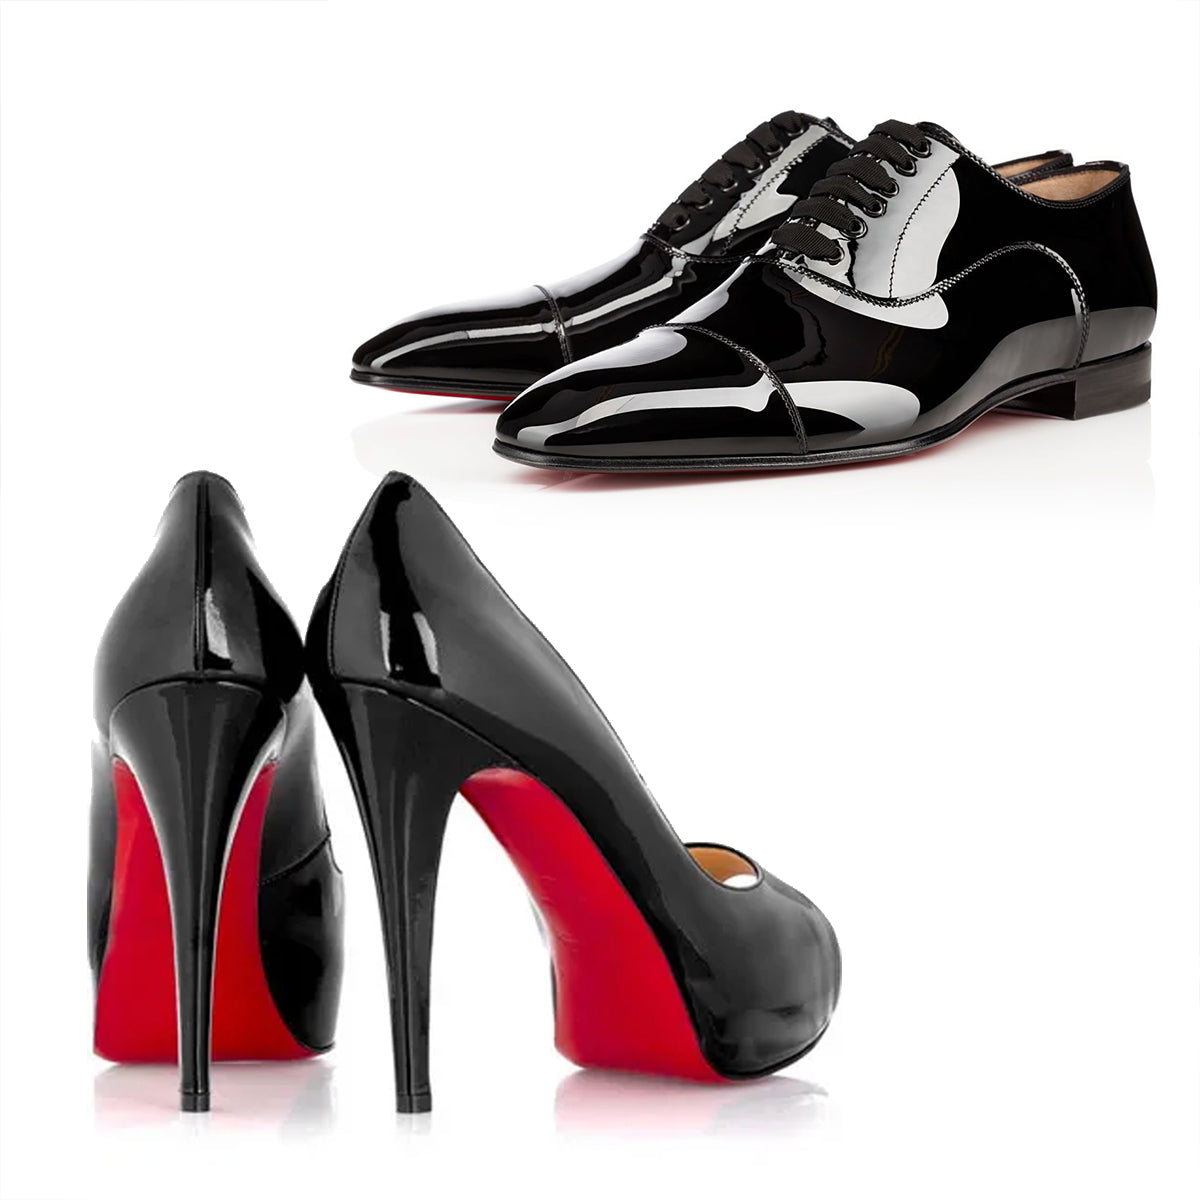 LOUBOUTIN SHOES / HEELS SERVICES WITH RETURN SHIPPING PRICE - £80+